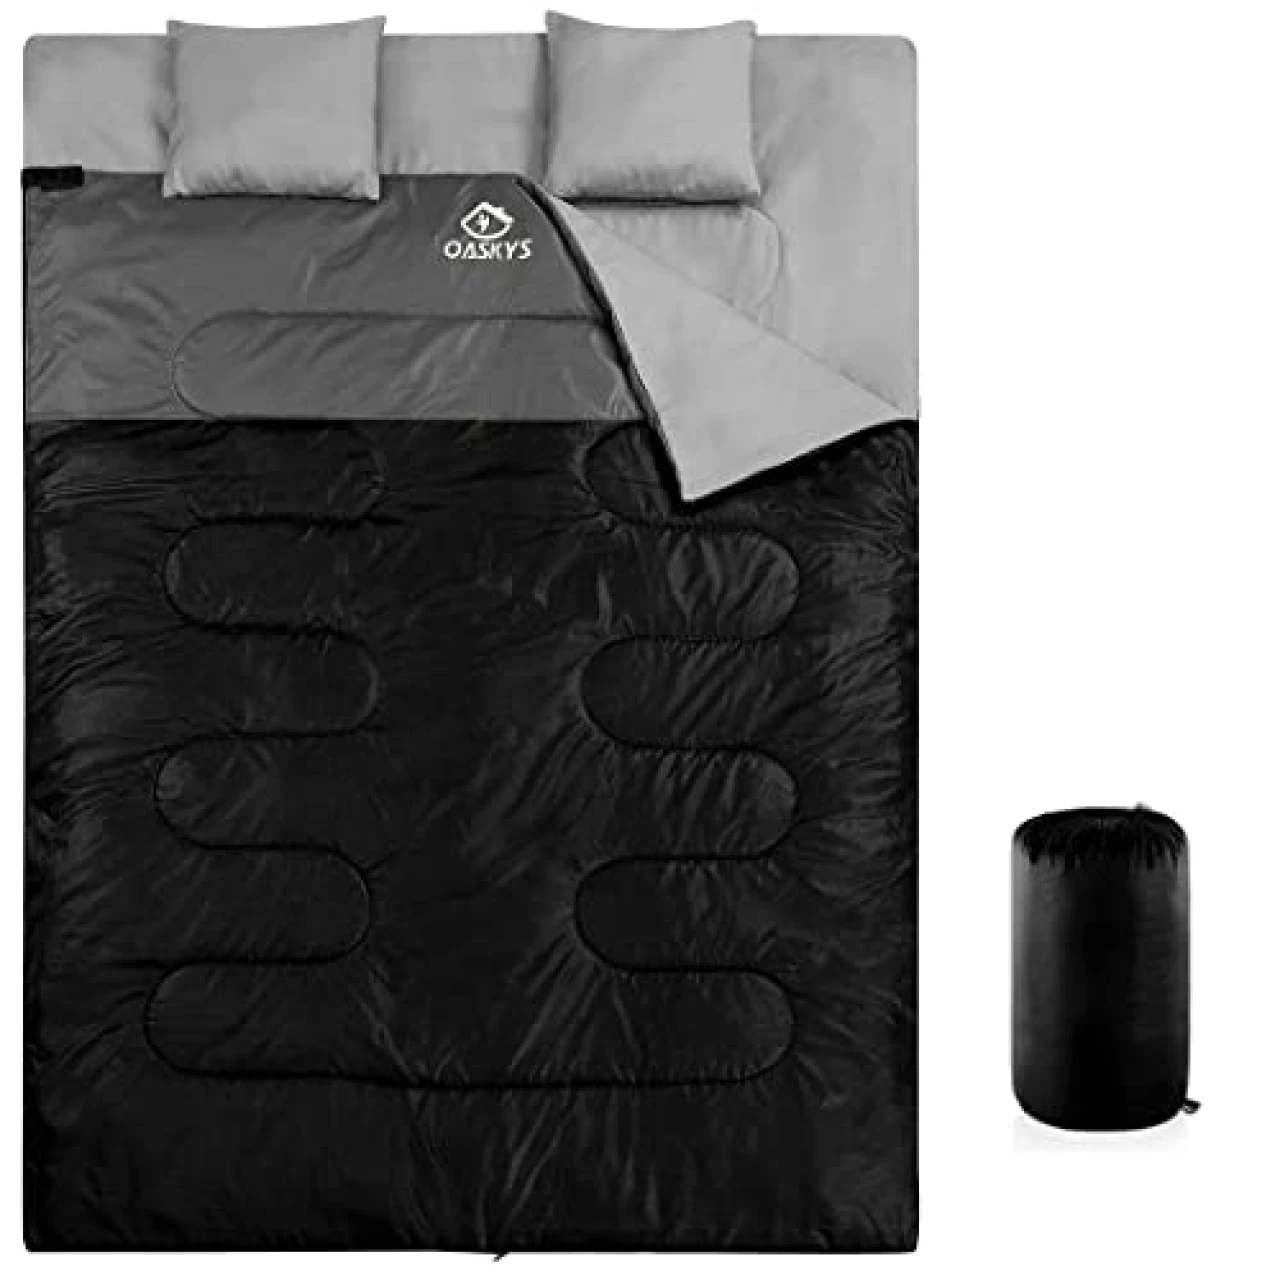 oaskys Double Sleeping Bag for Adults with 2 Pillows - Queen Size XL Waterproof Sleeping Bag for All Season Camping Hiking Backpacking 2 Person Sleeping Bags for Cold Weather &amp; Warm